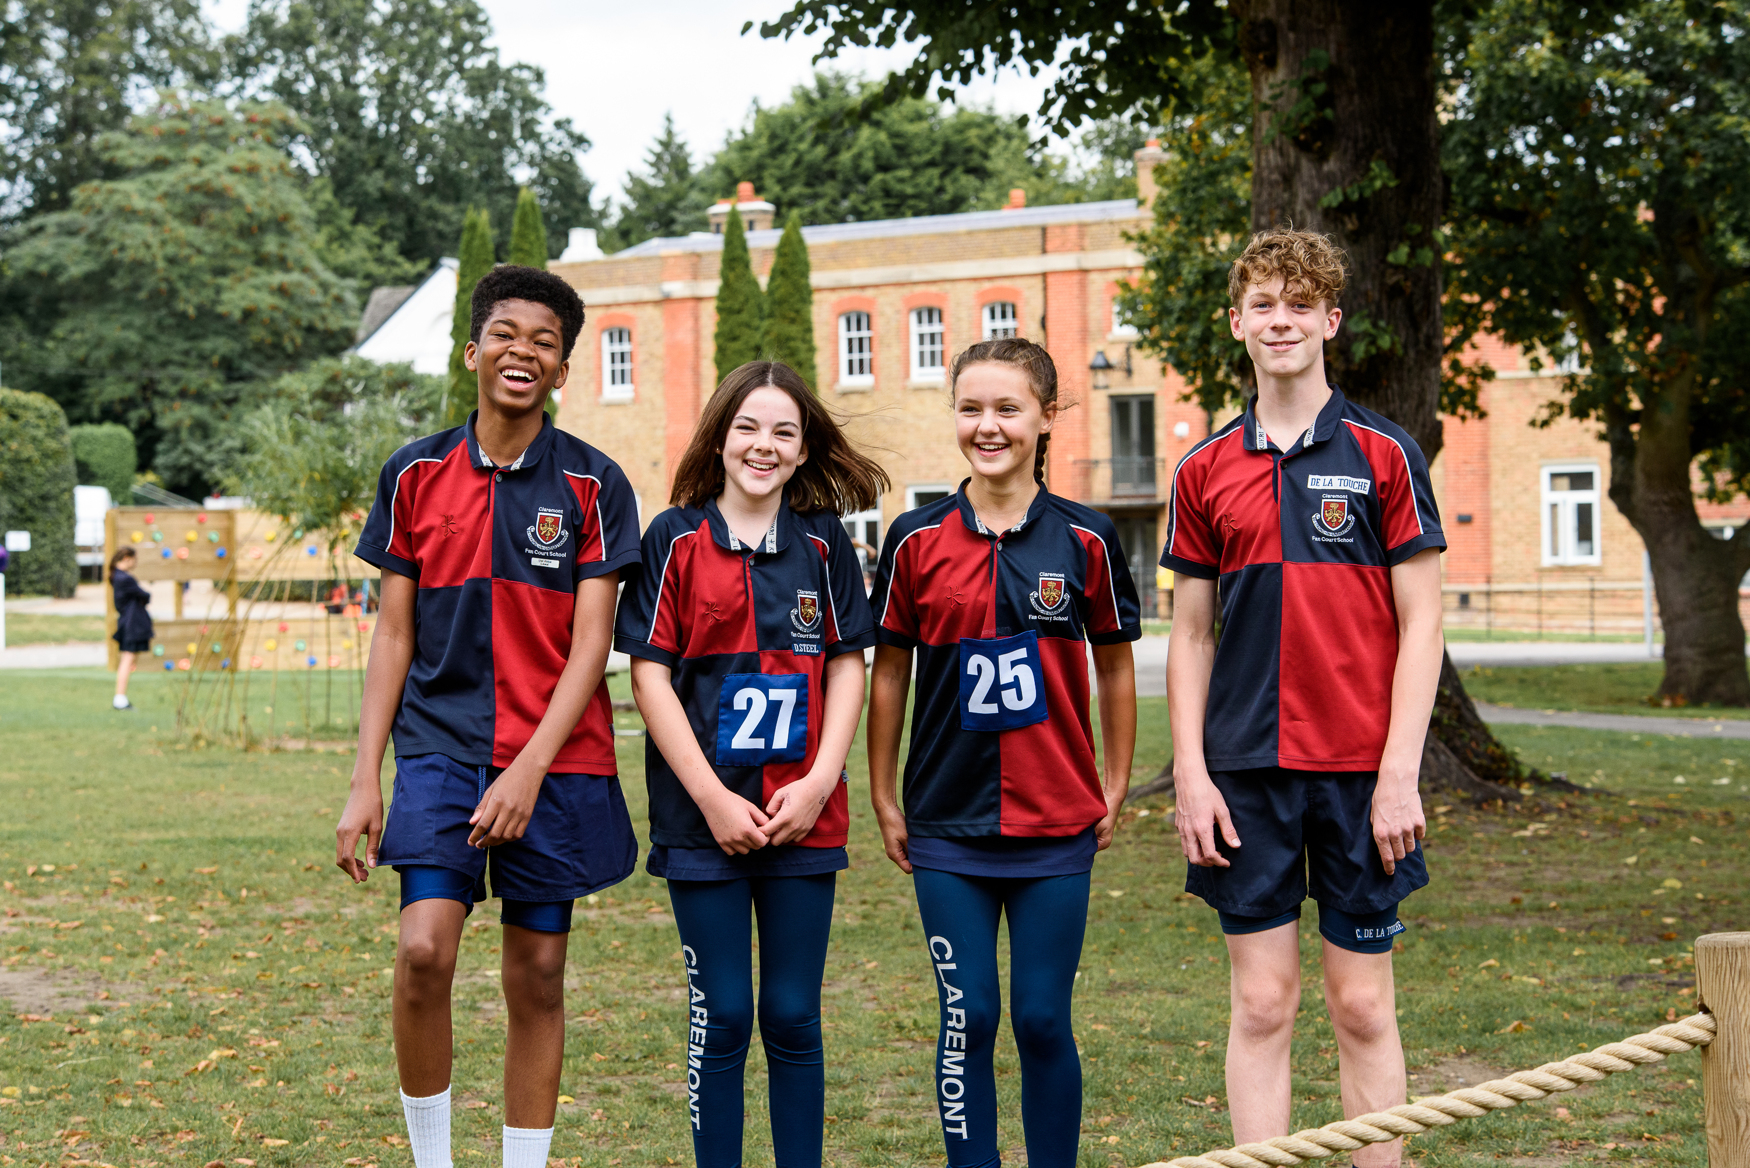 Pupils in sports kit